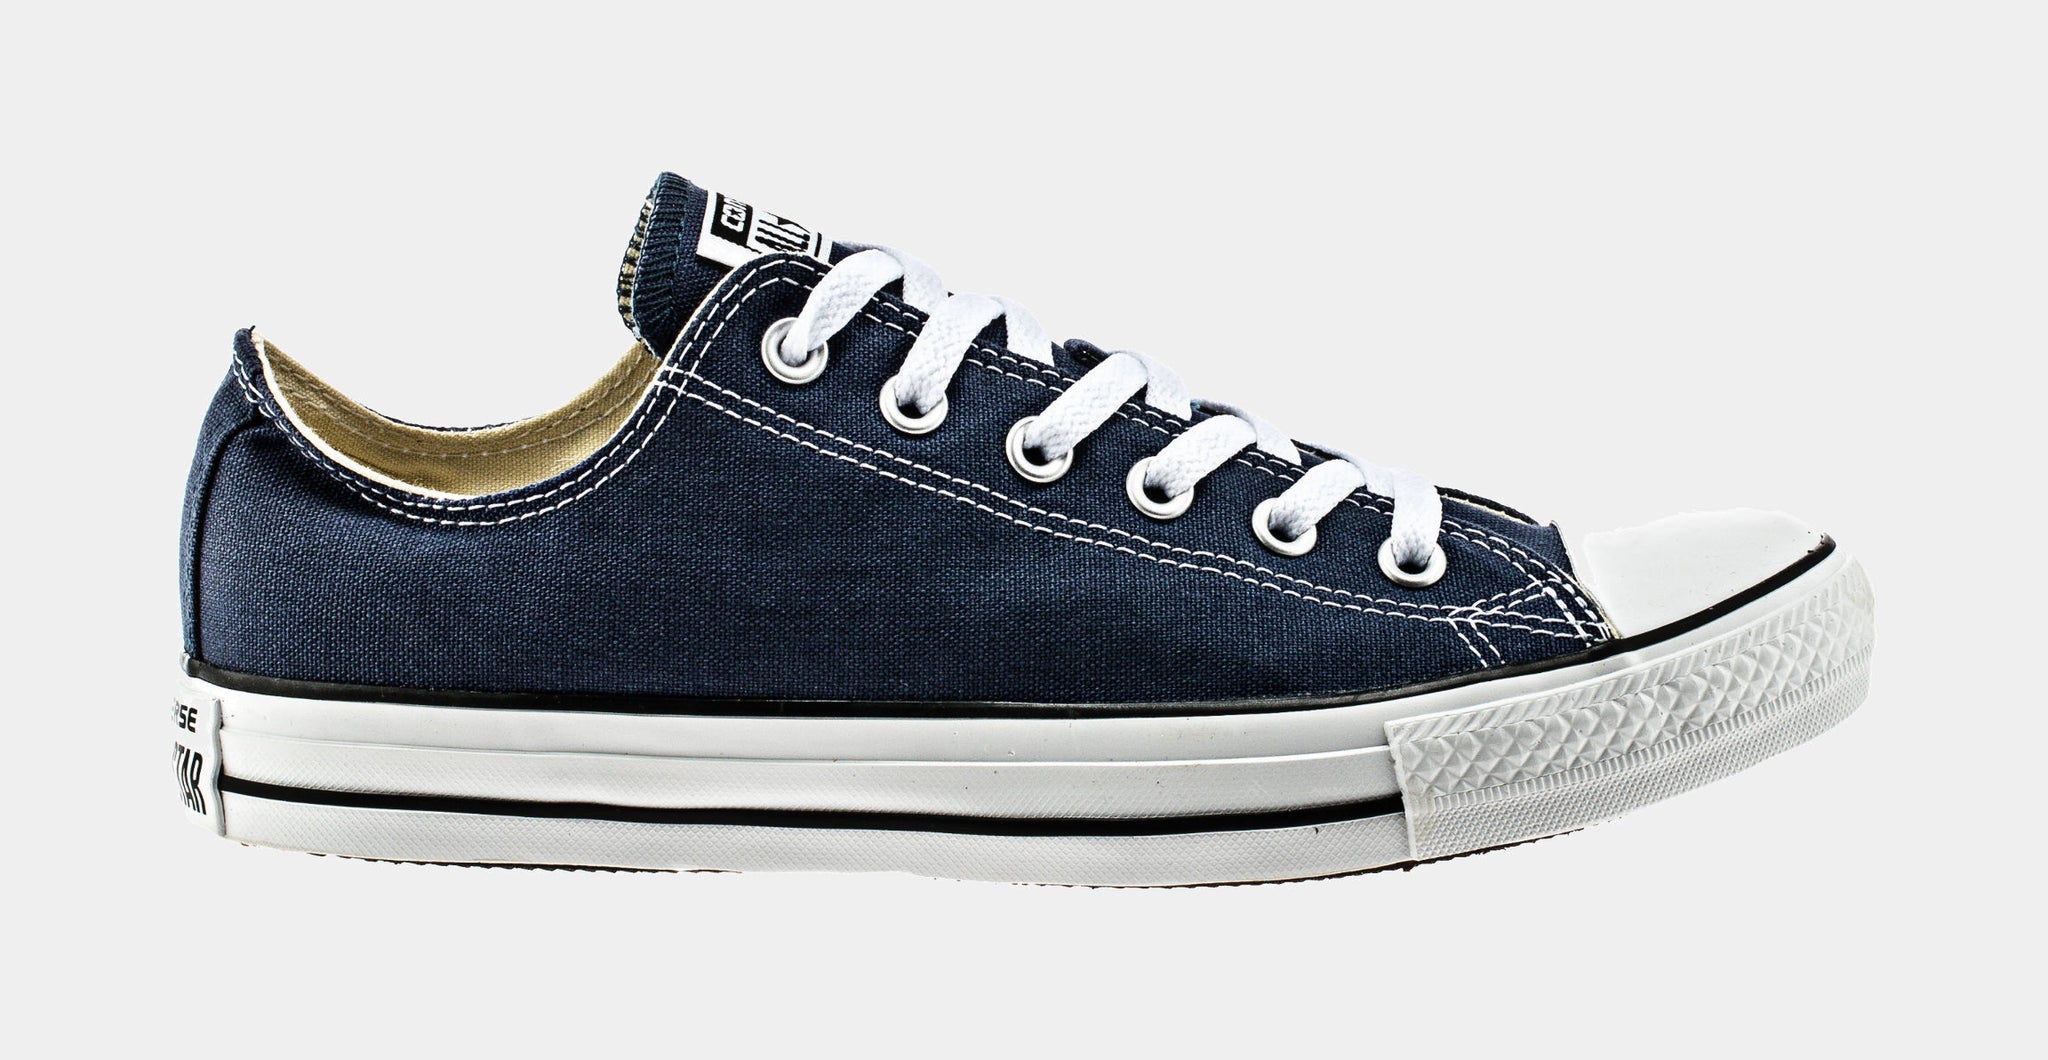 Converse Men's Chuck Taylor All Star Low Sneakers